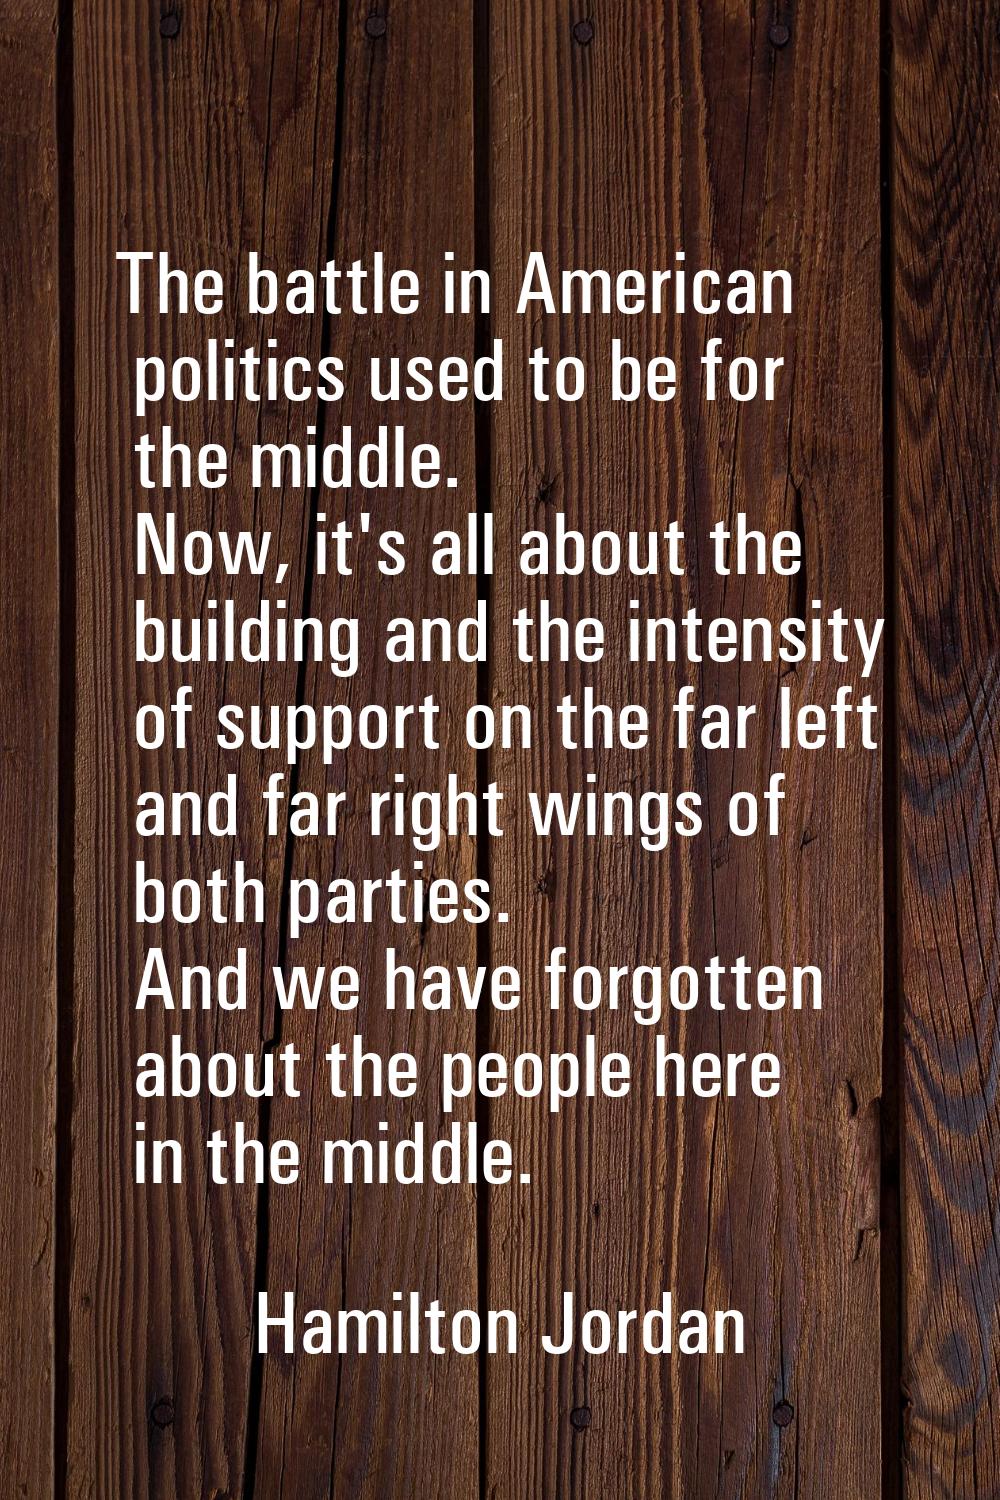 The battle in American politics used to be for the middle. Now, it's all about the building and the